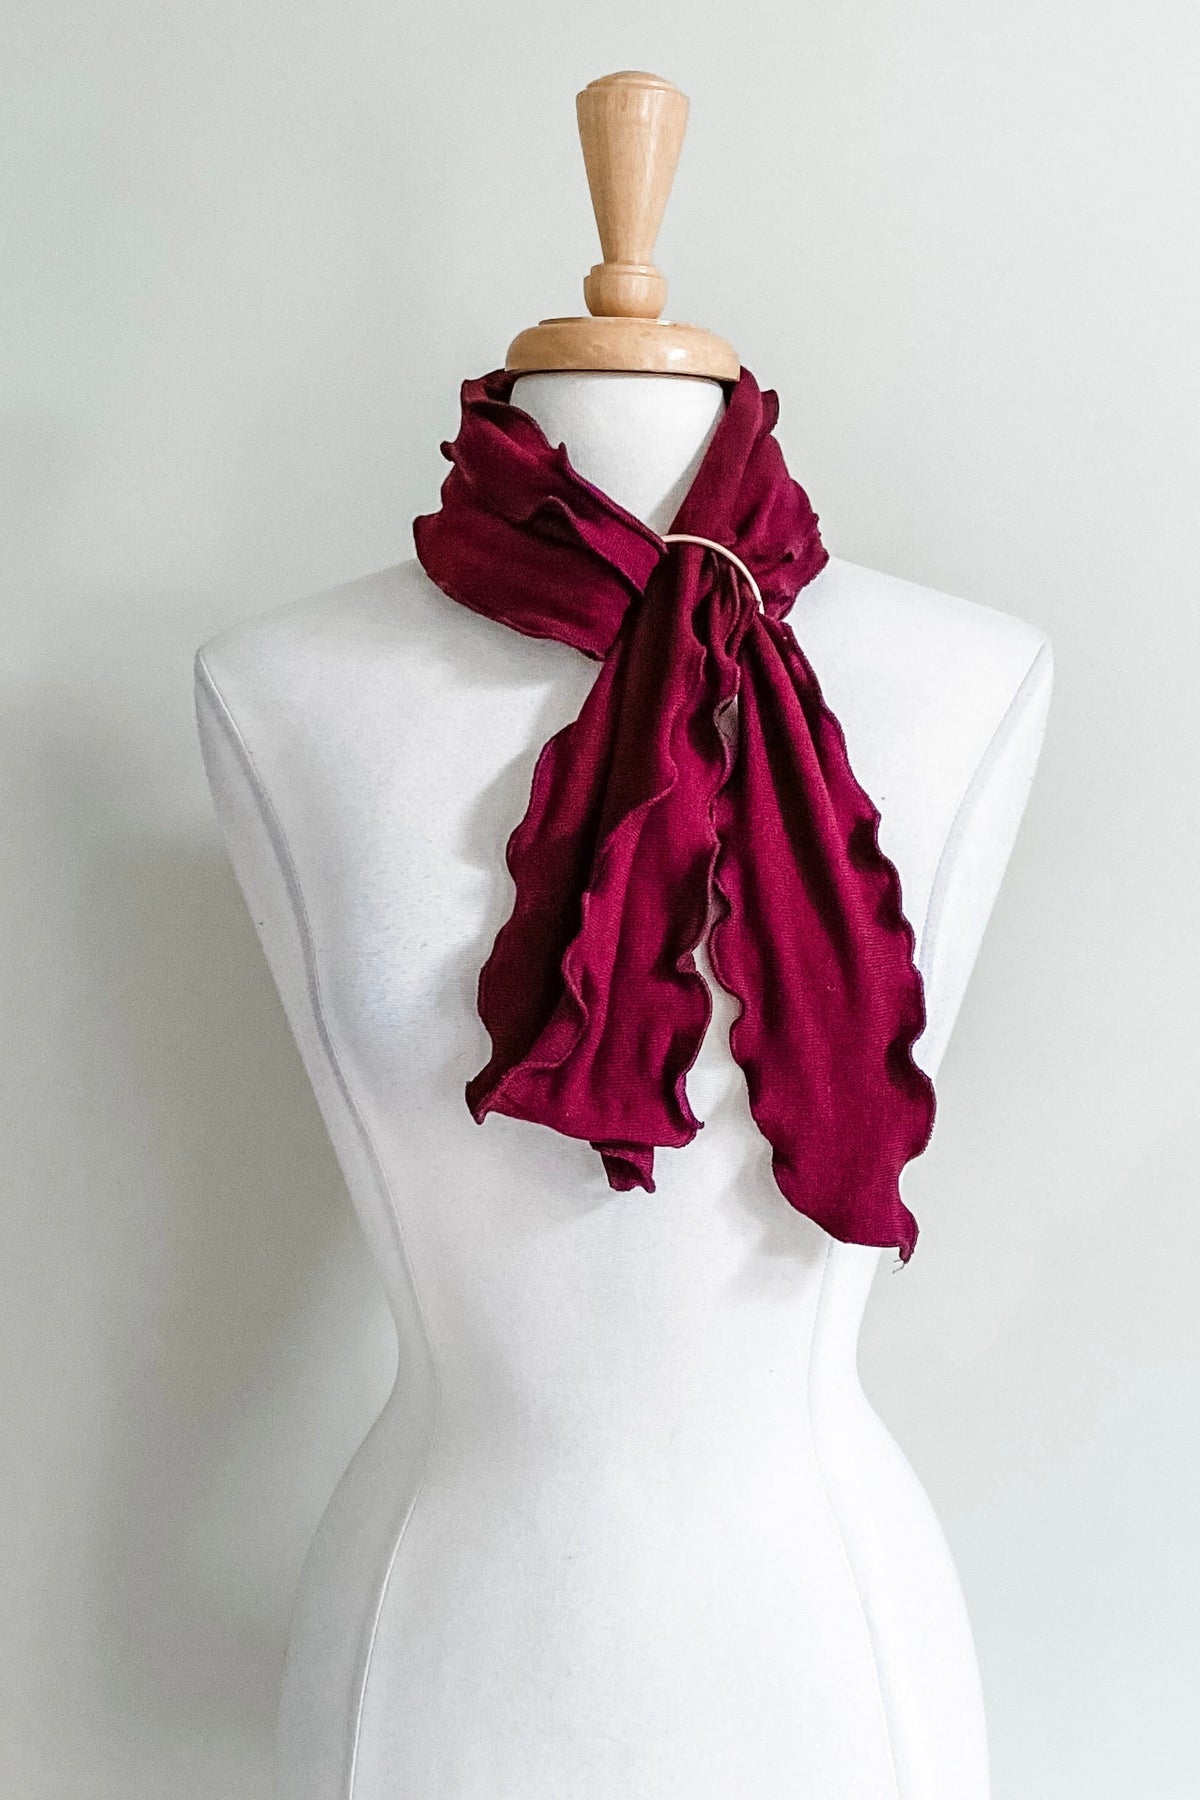 Matching Sash in Oxblood color from Diane Kroe